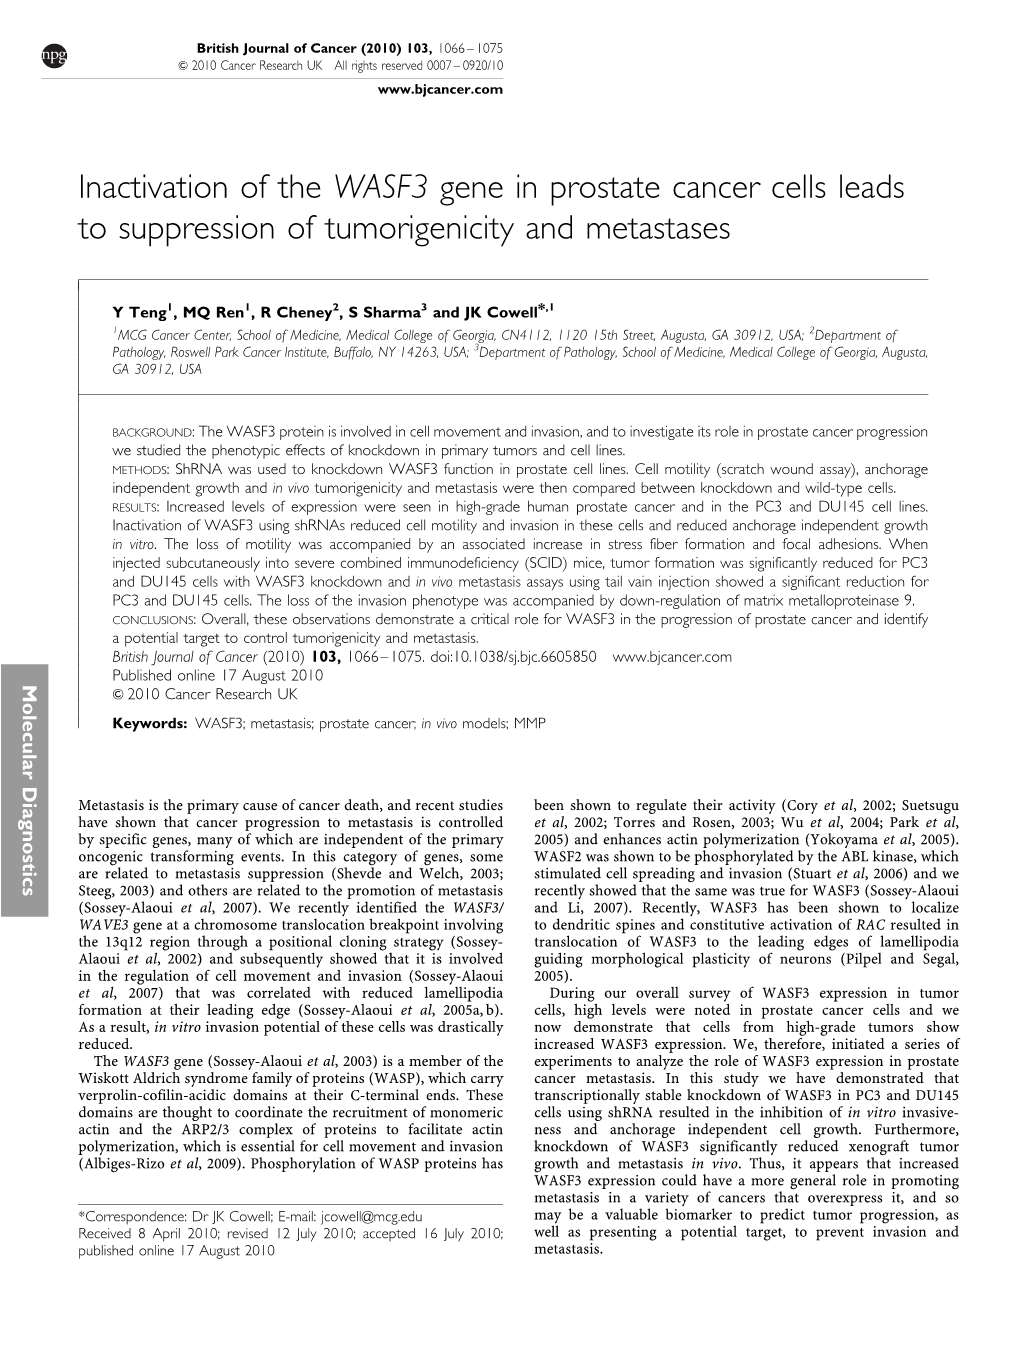 Inactivation of the WASF3 Gene in Prostate Cancer Cells Leads to Suppression of Tumorigenicity and Metastases